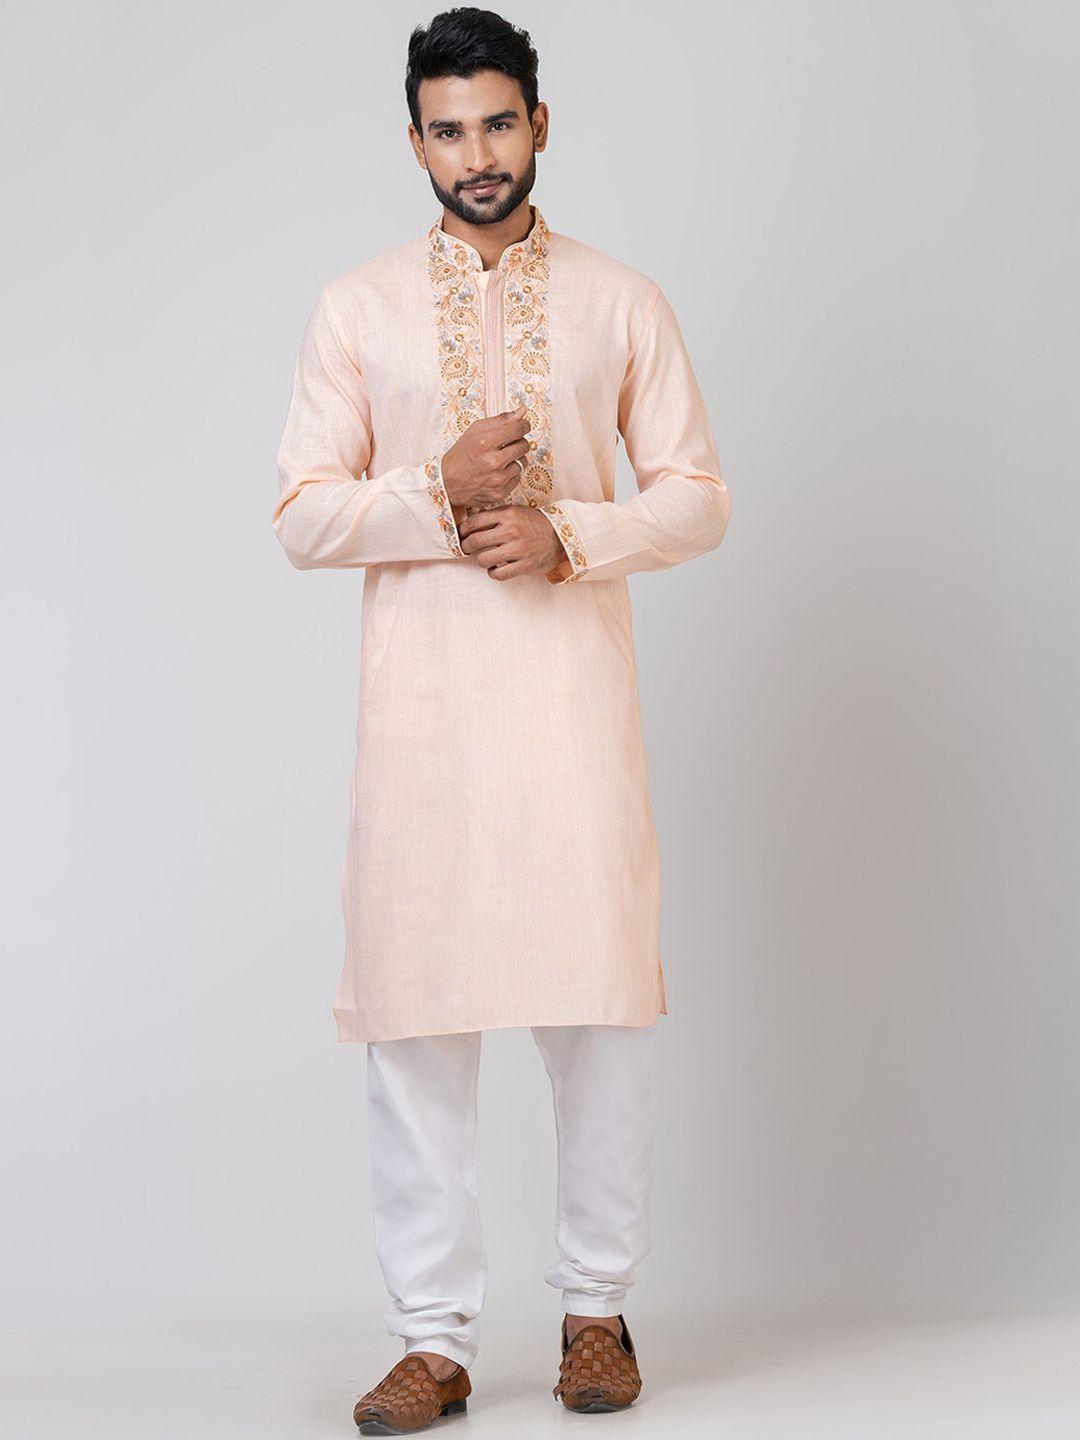 hu - handcrafted uniquely floral embroidered cotton silk kurta